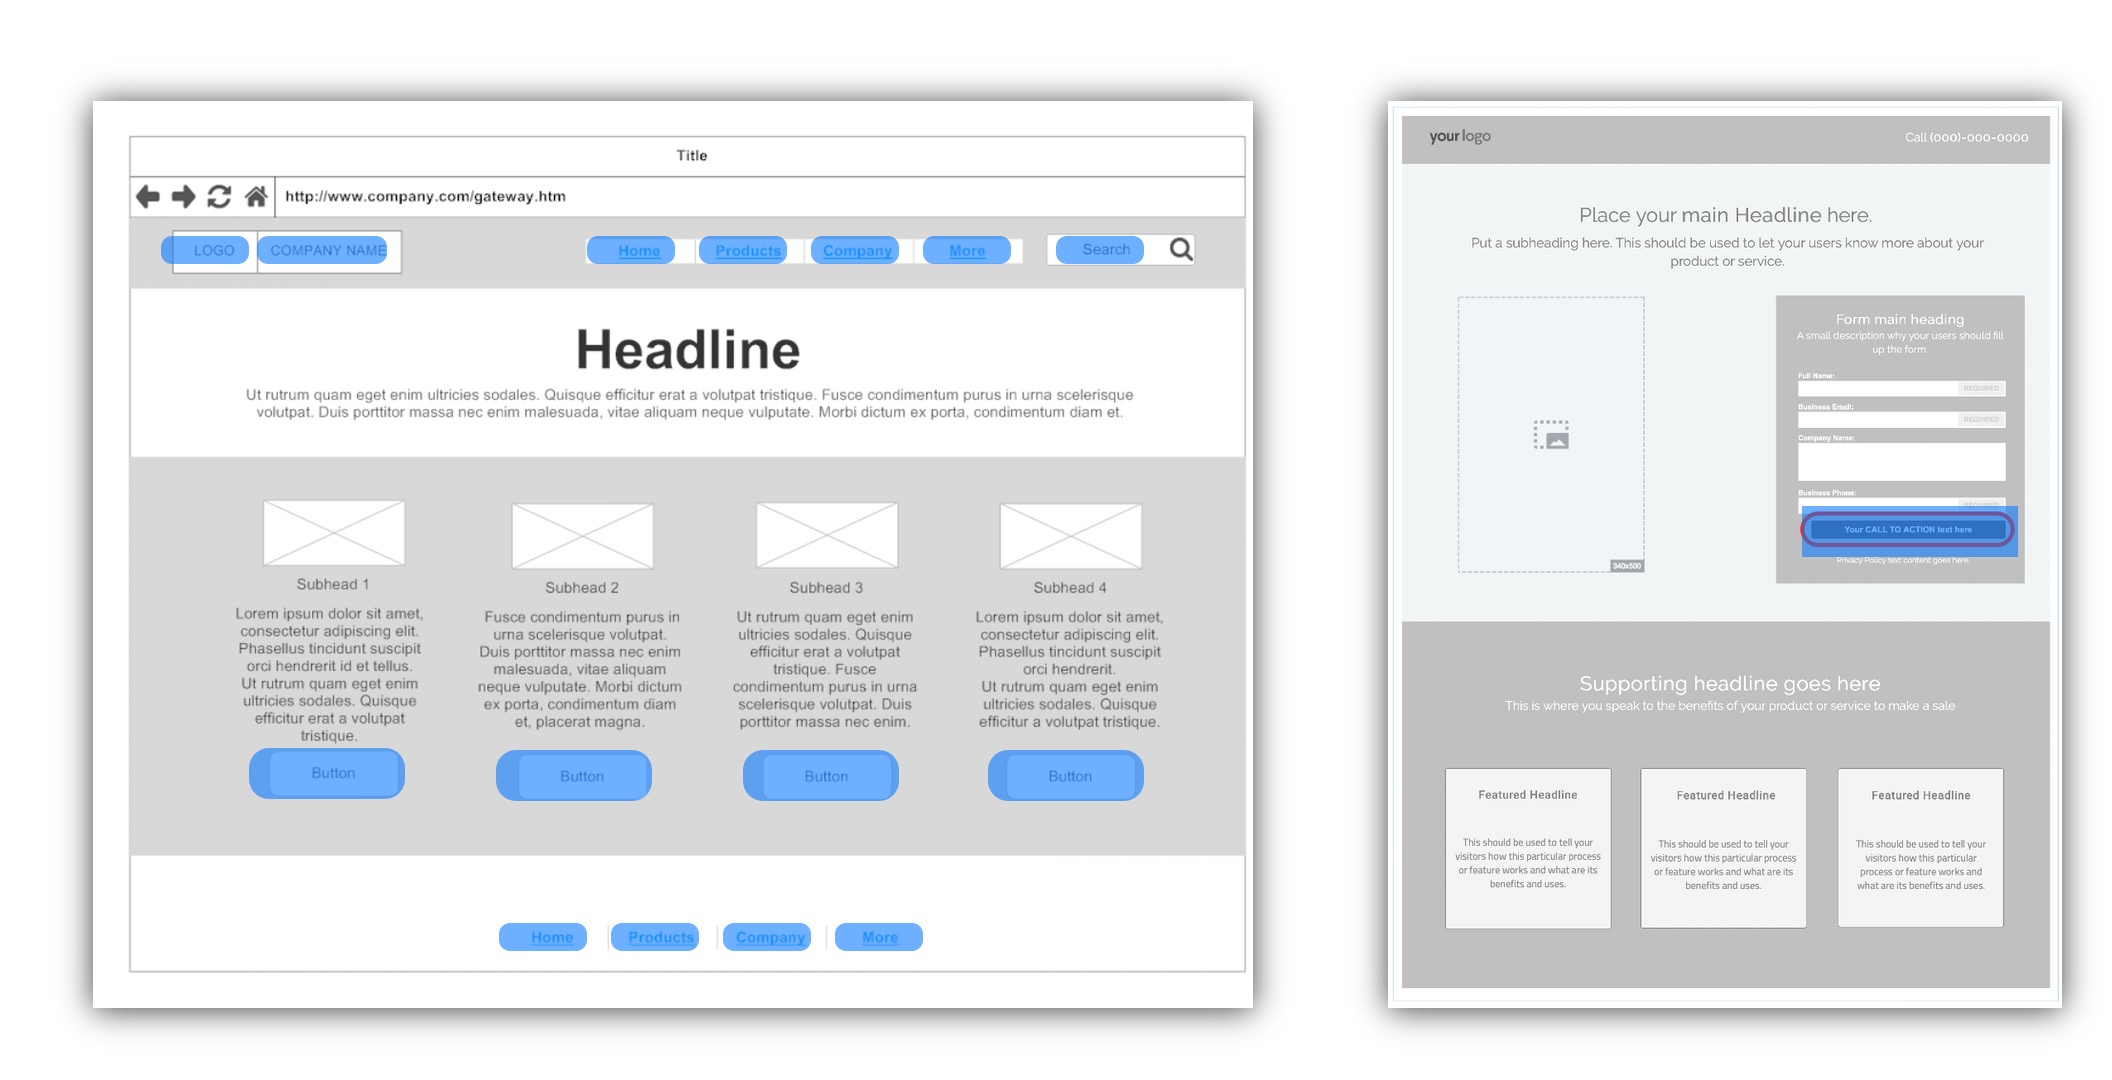 Comparison of Homepage and Landing Page image